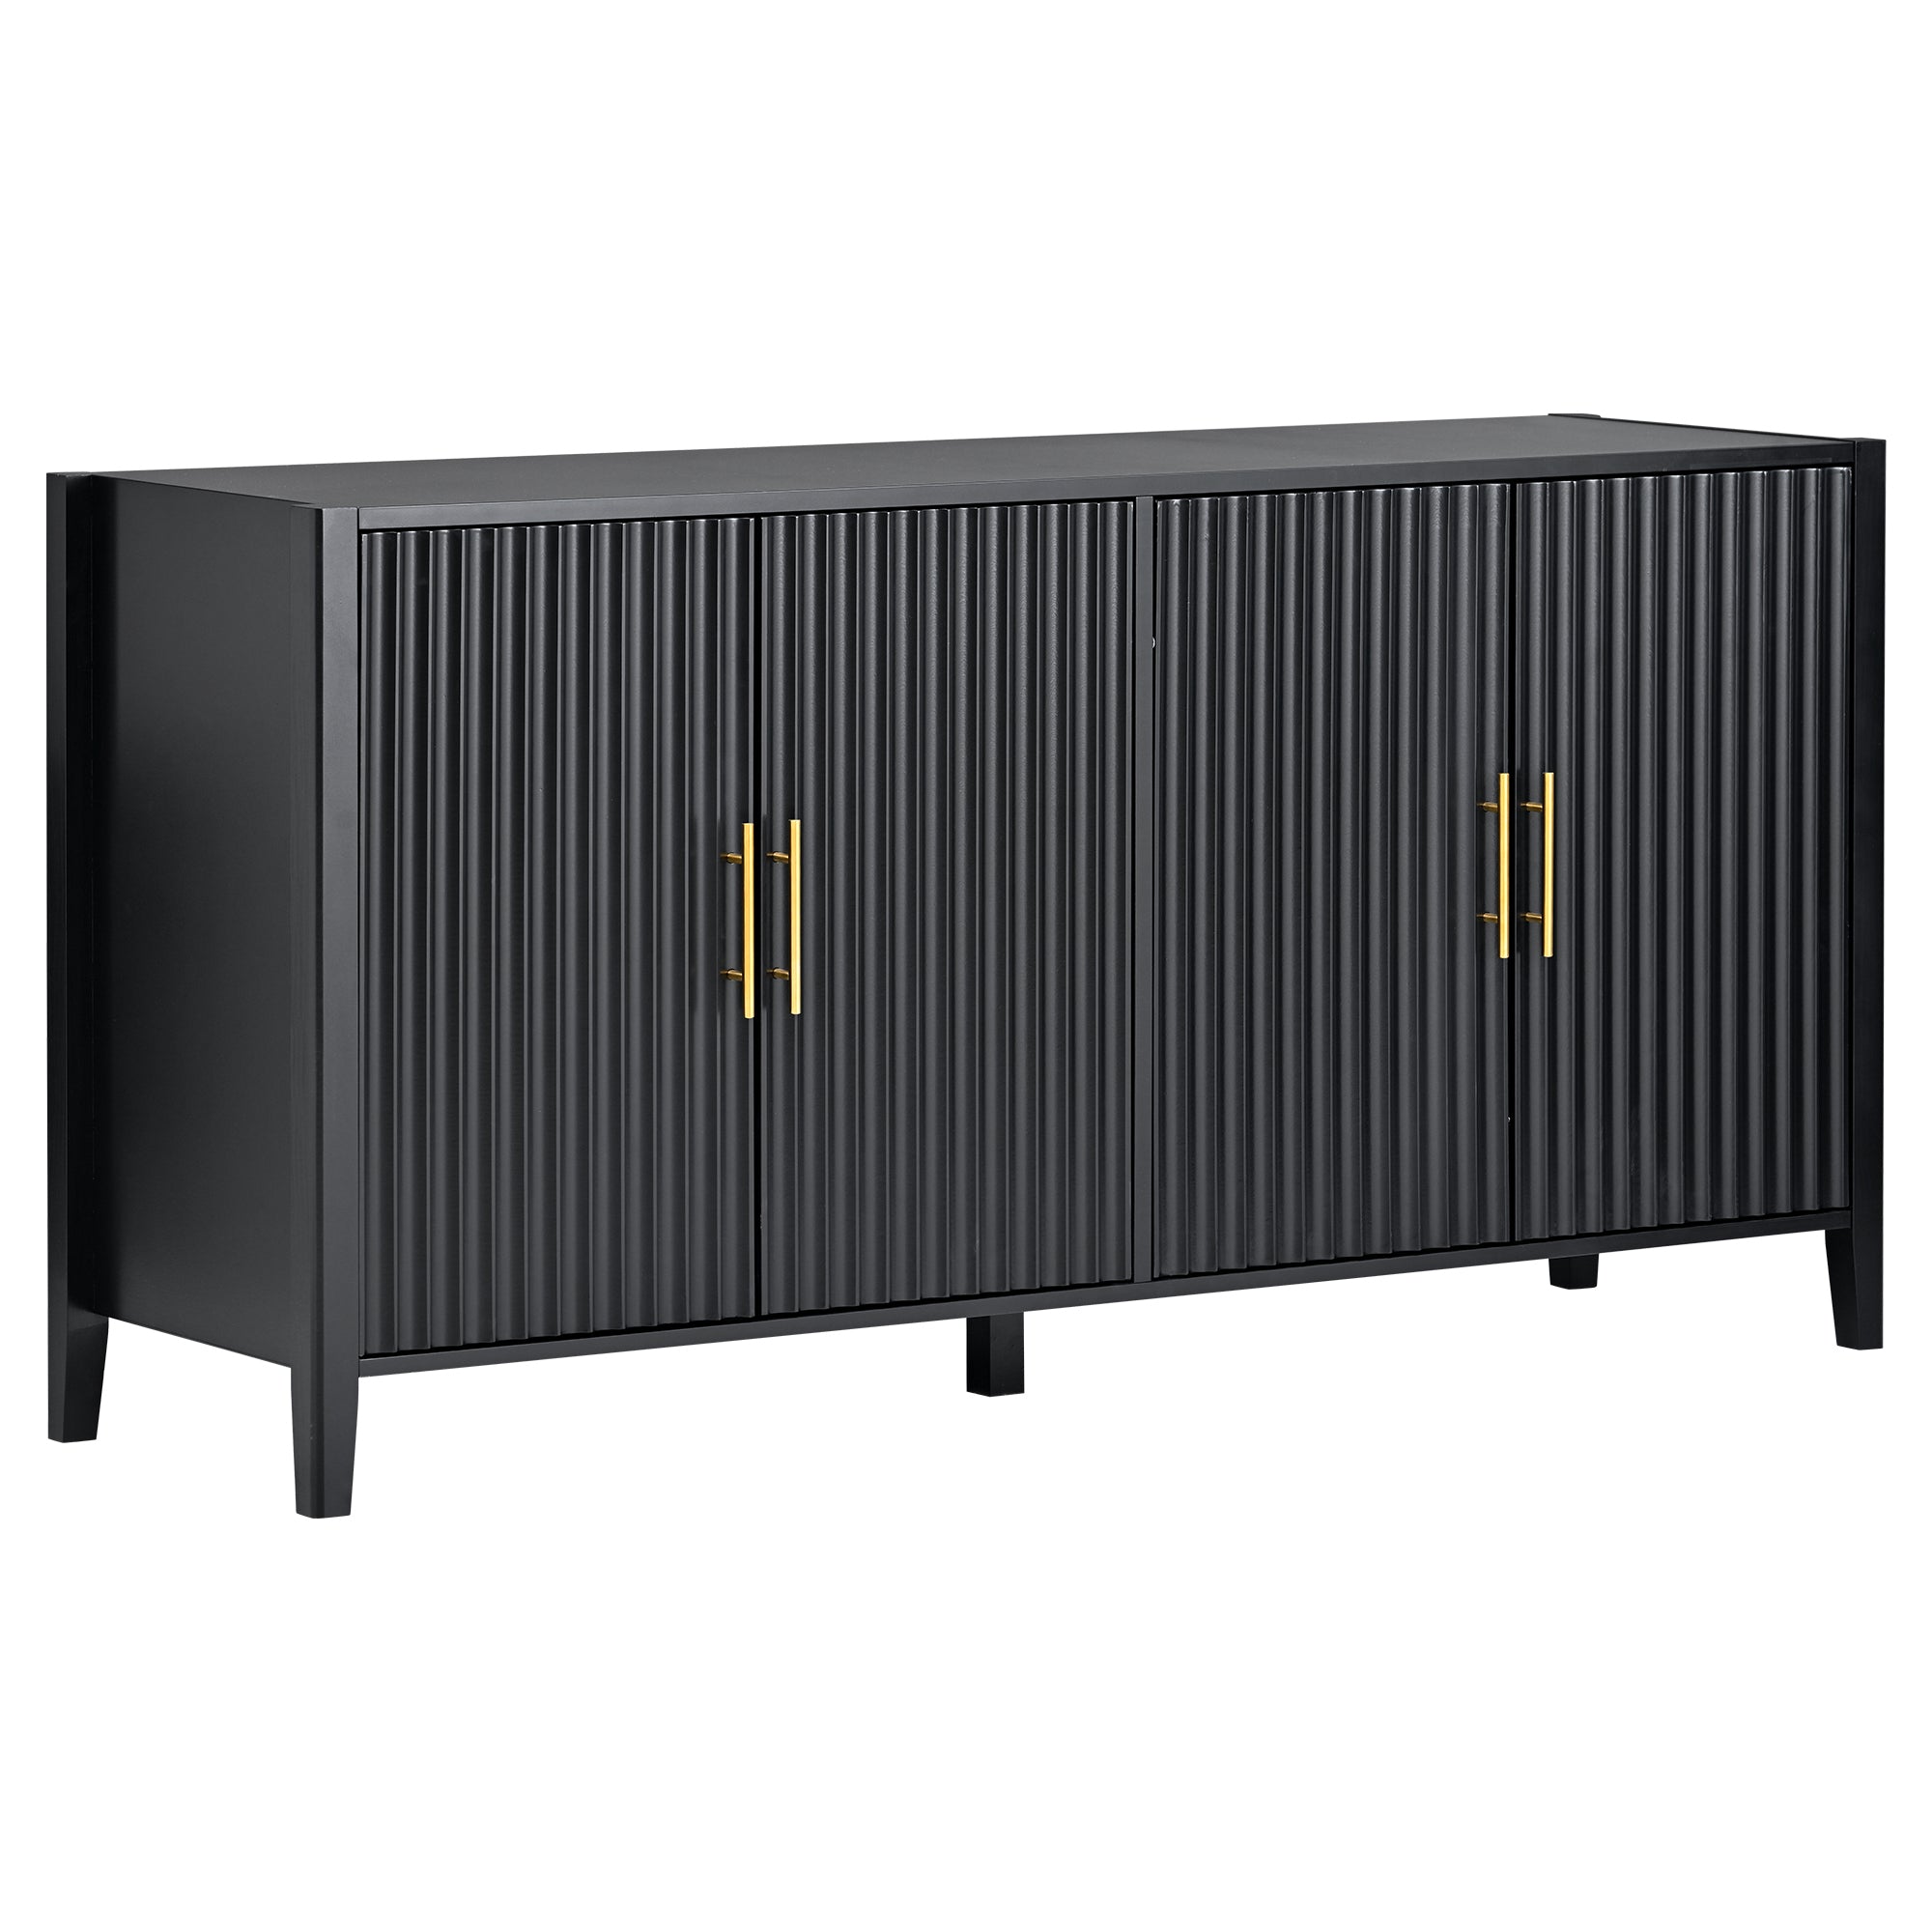 U Style Accent Storage Cabinet Sideboard Wooden black-solid wood+mdf